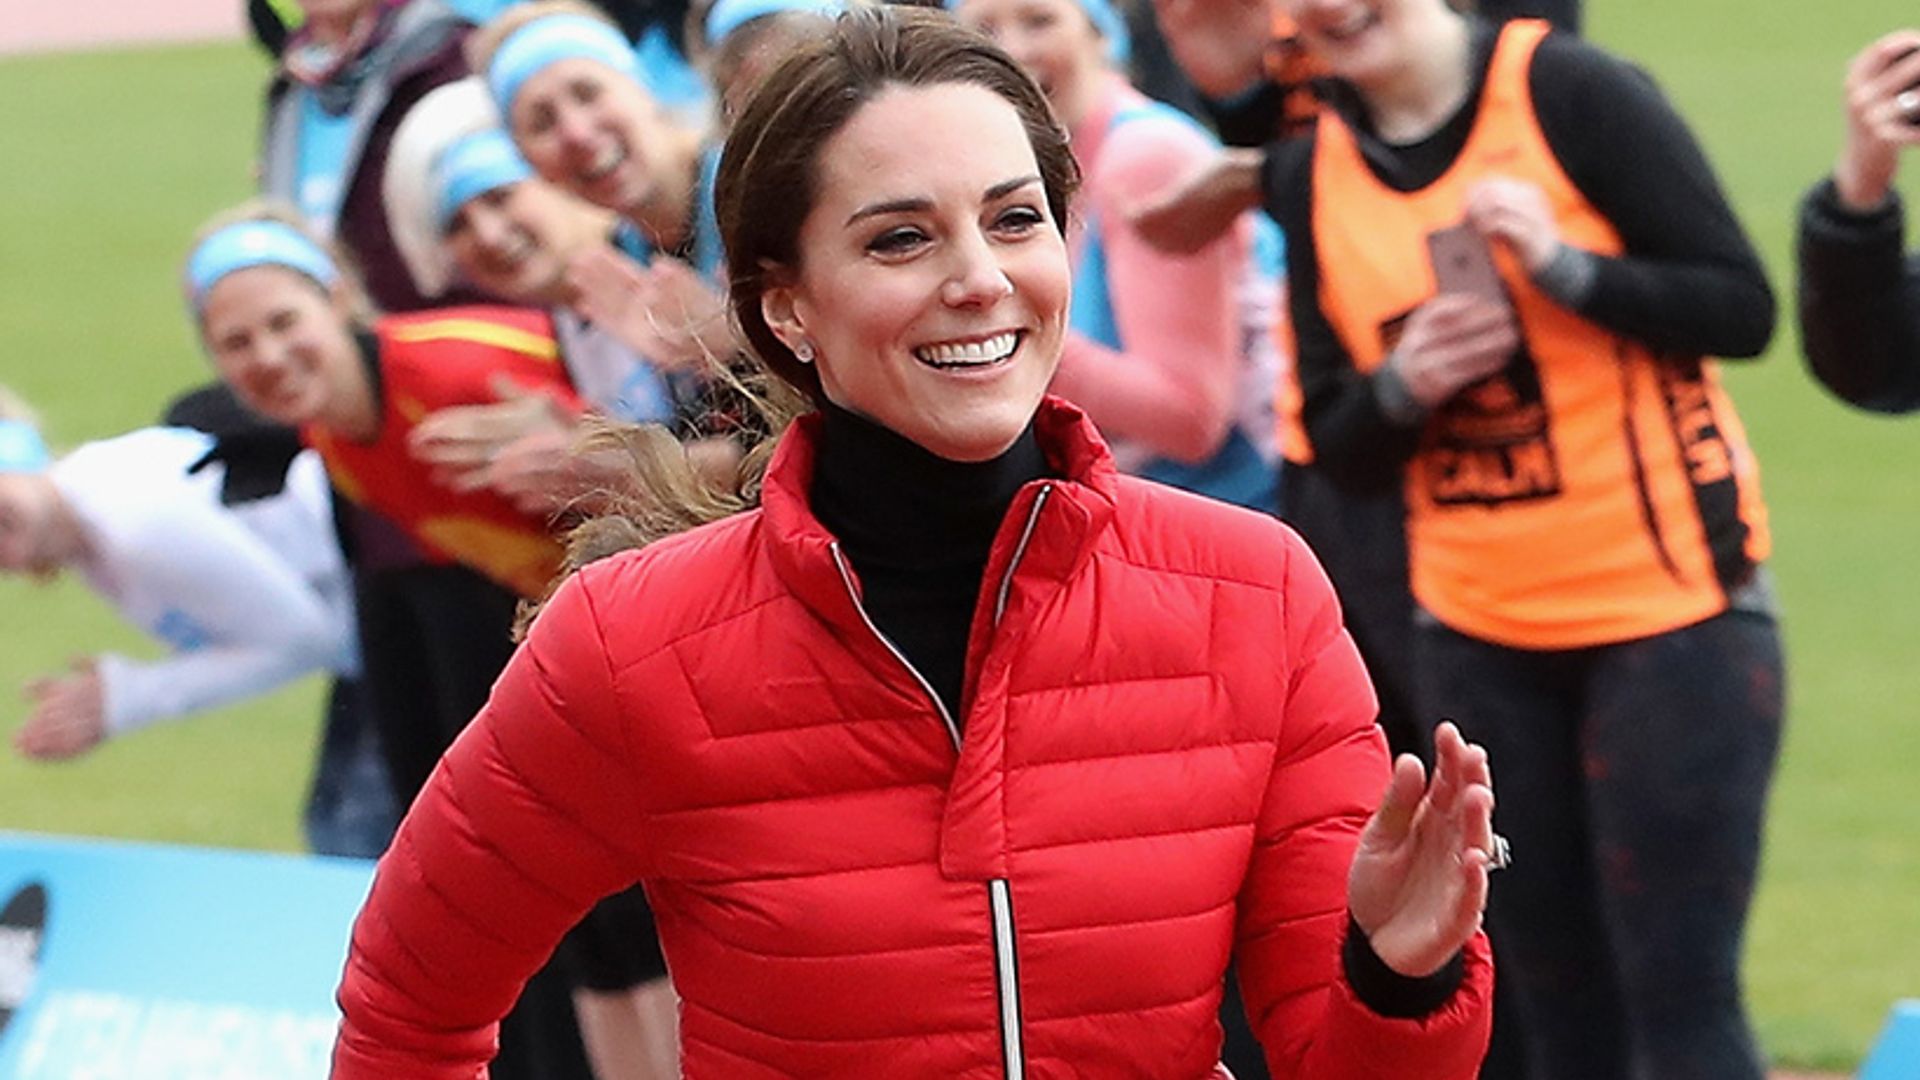 Kate Middleton to attend London Marathon for first time | HELLO!